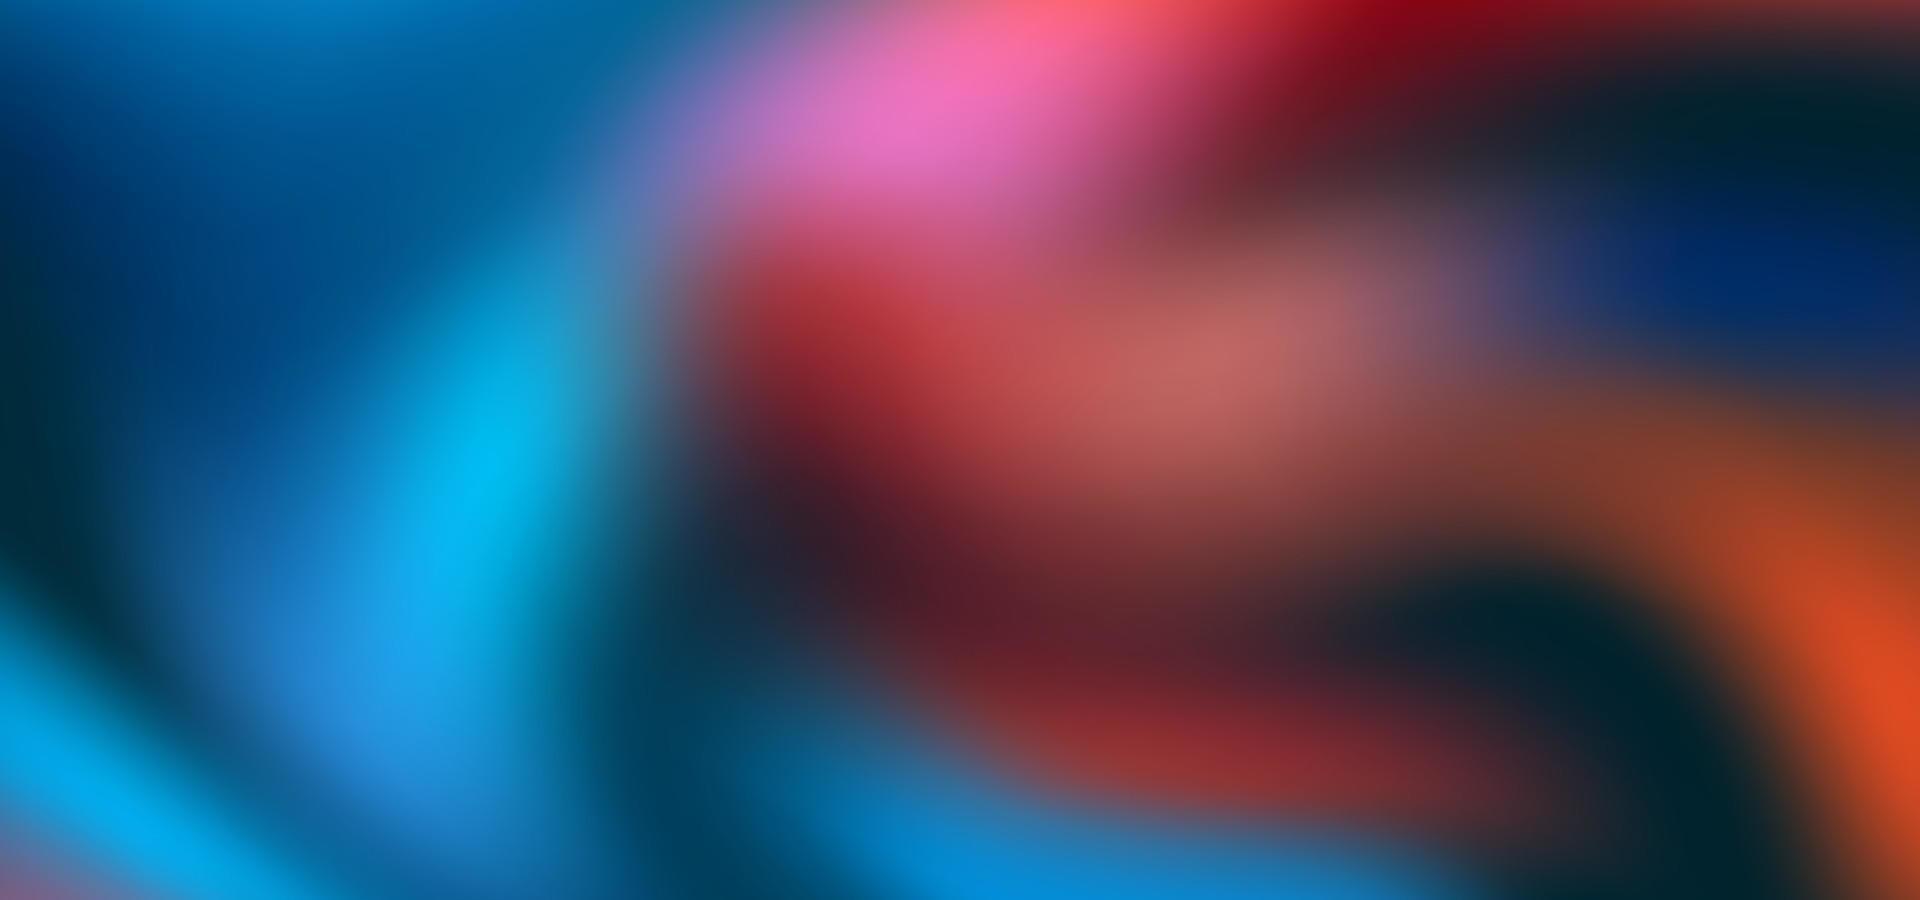 Abstract Colorful red blue and orange blurred Mesh Background. vector